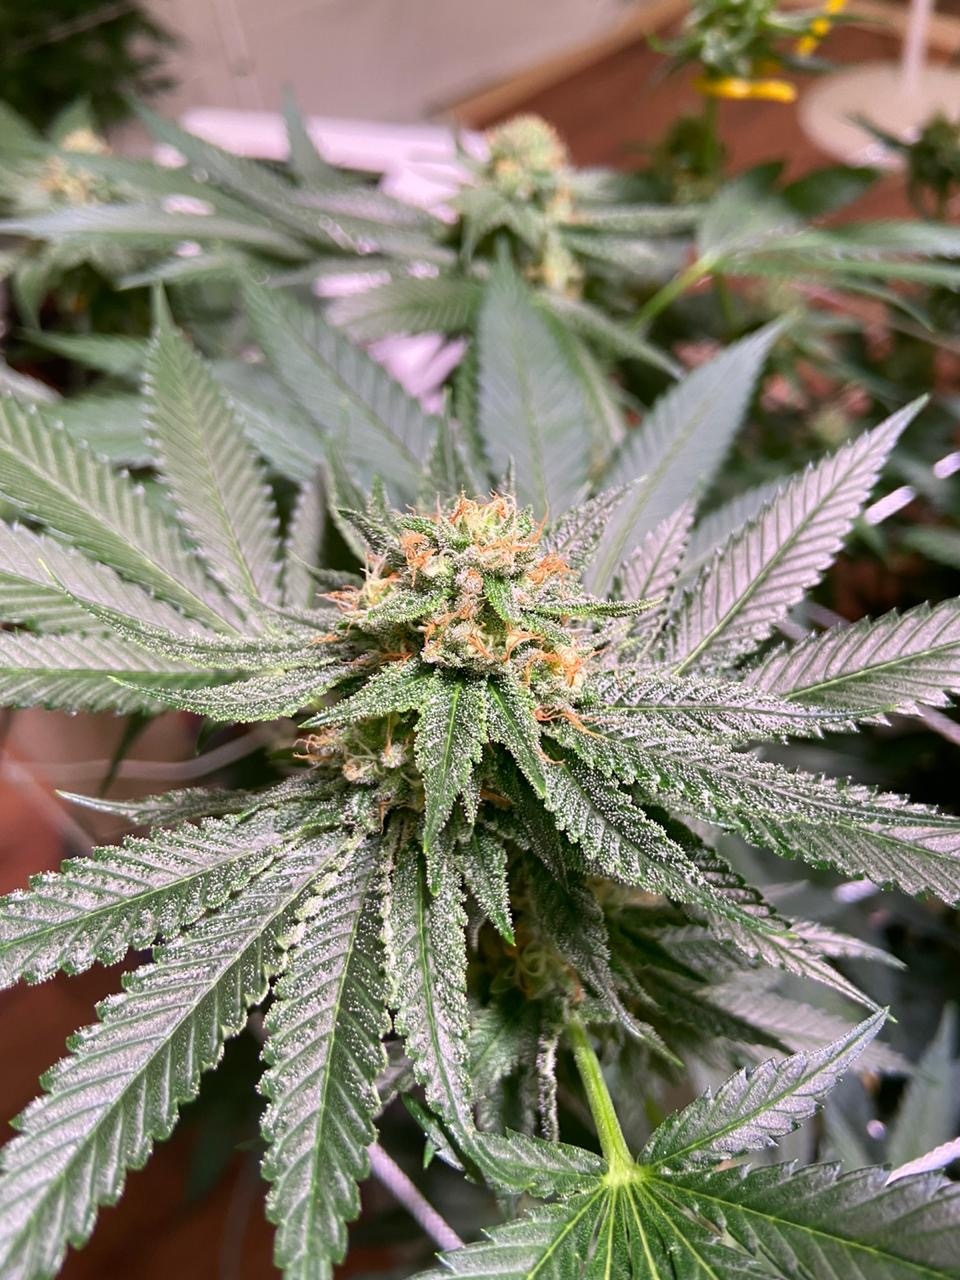 Pistils turning red to early week 4 2